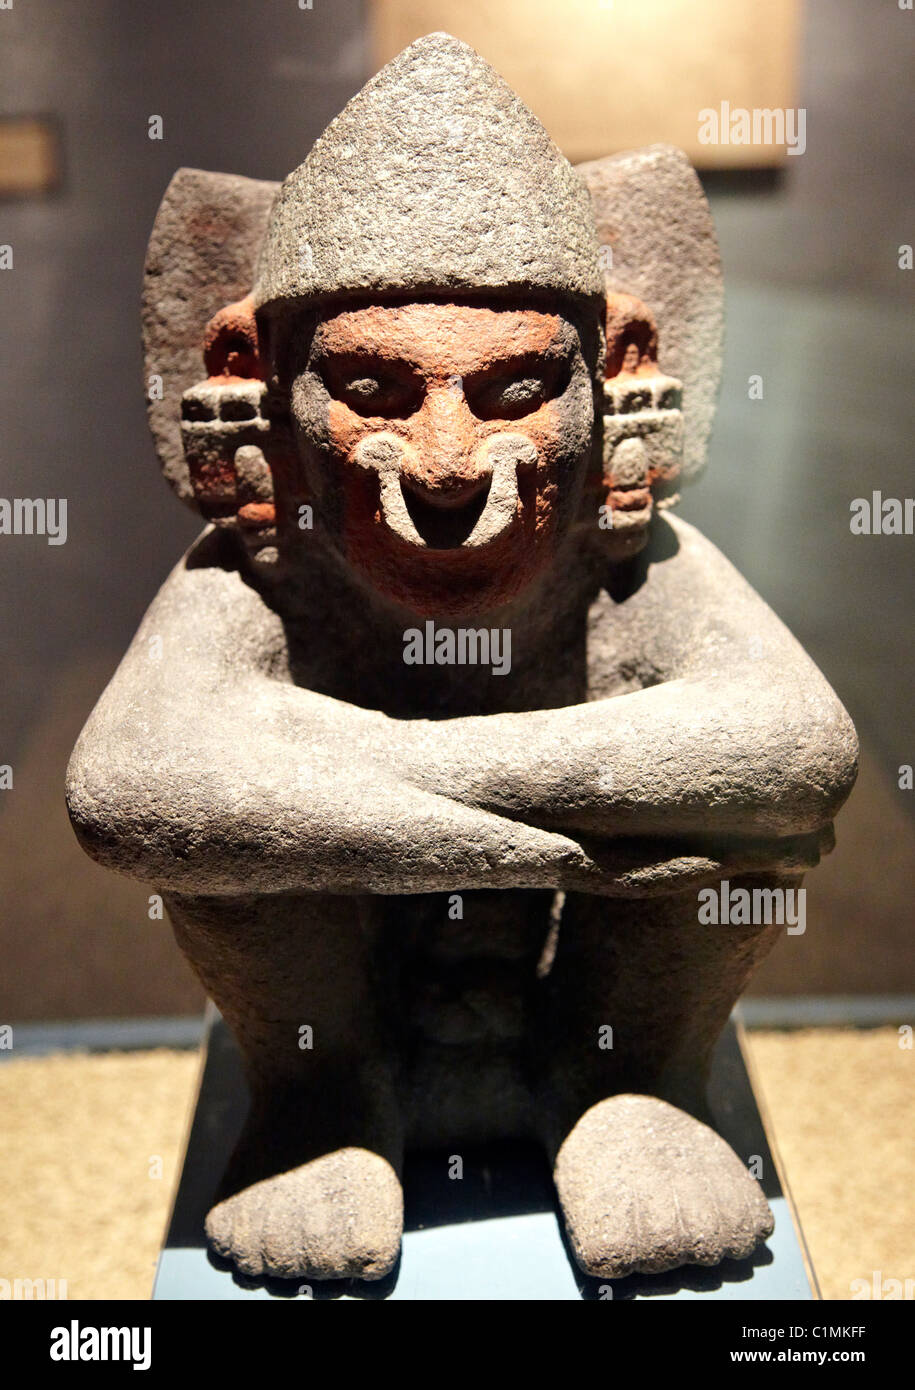 Teotihuacan Stone Sculpture Templo Mayor Museum Mexico City Stock Photo